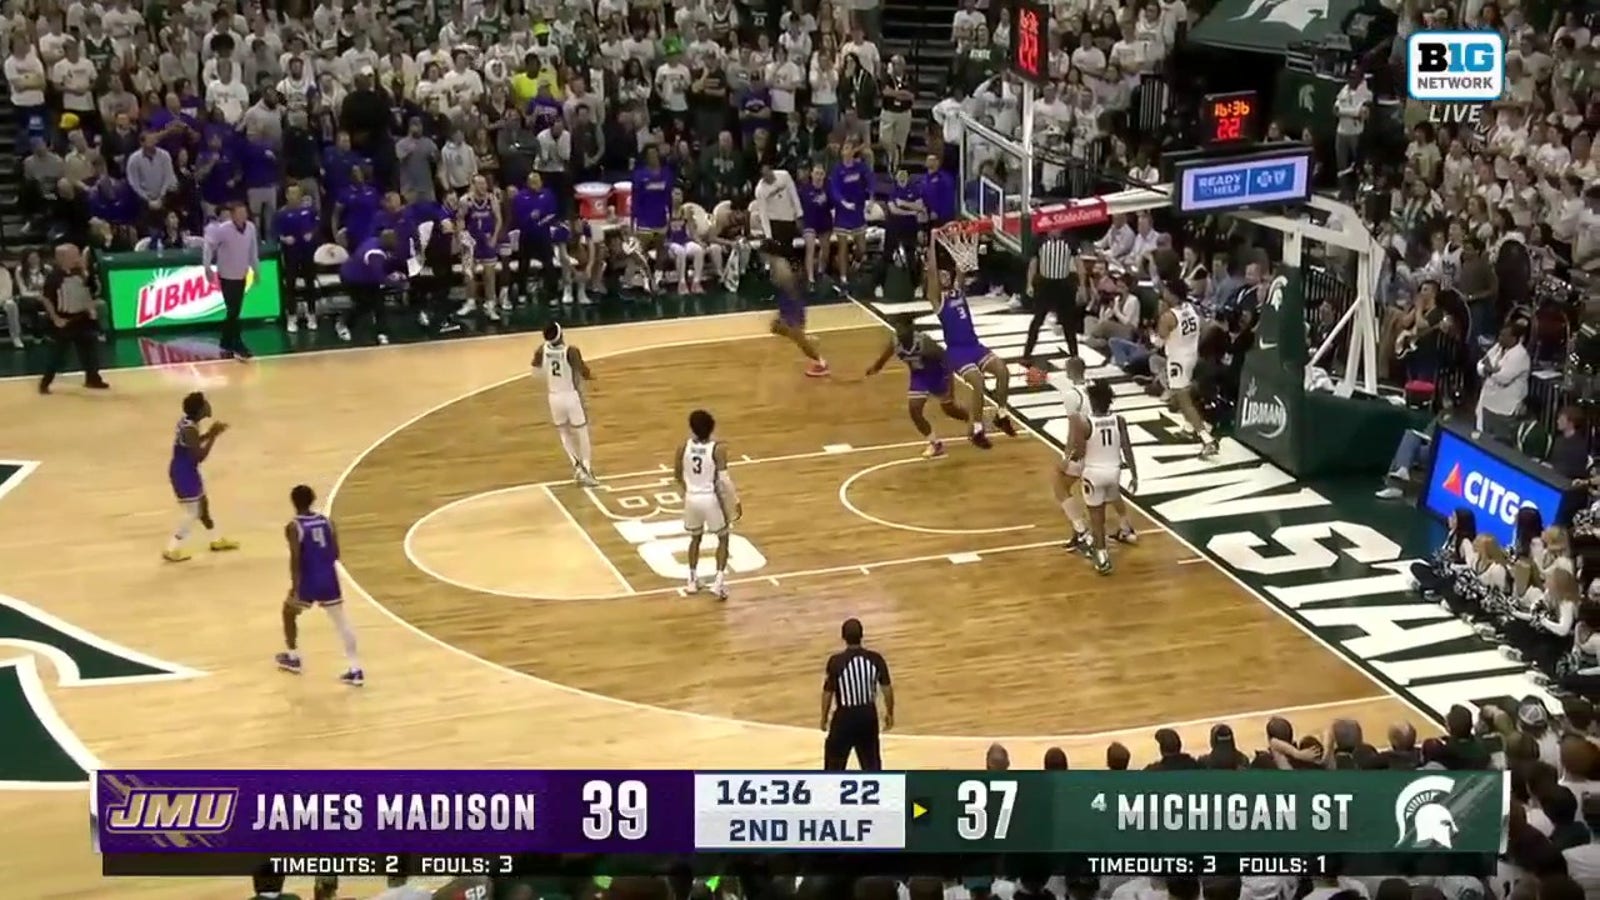 T.J. Bickerstaff throws down a dunk after Terrence Edwards Jr.'s beautiful pass to extend JMU's lead vs. Michigan State